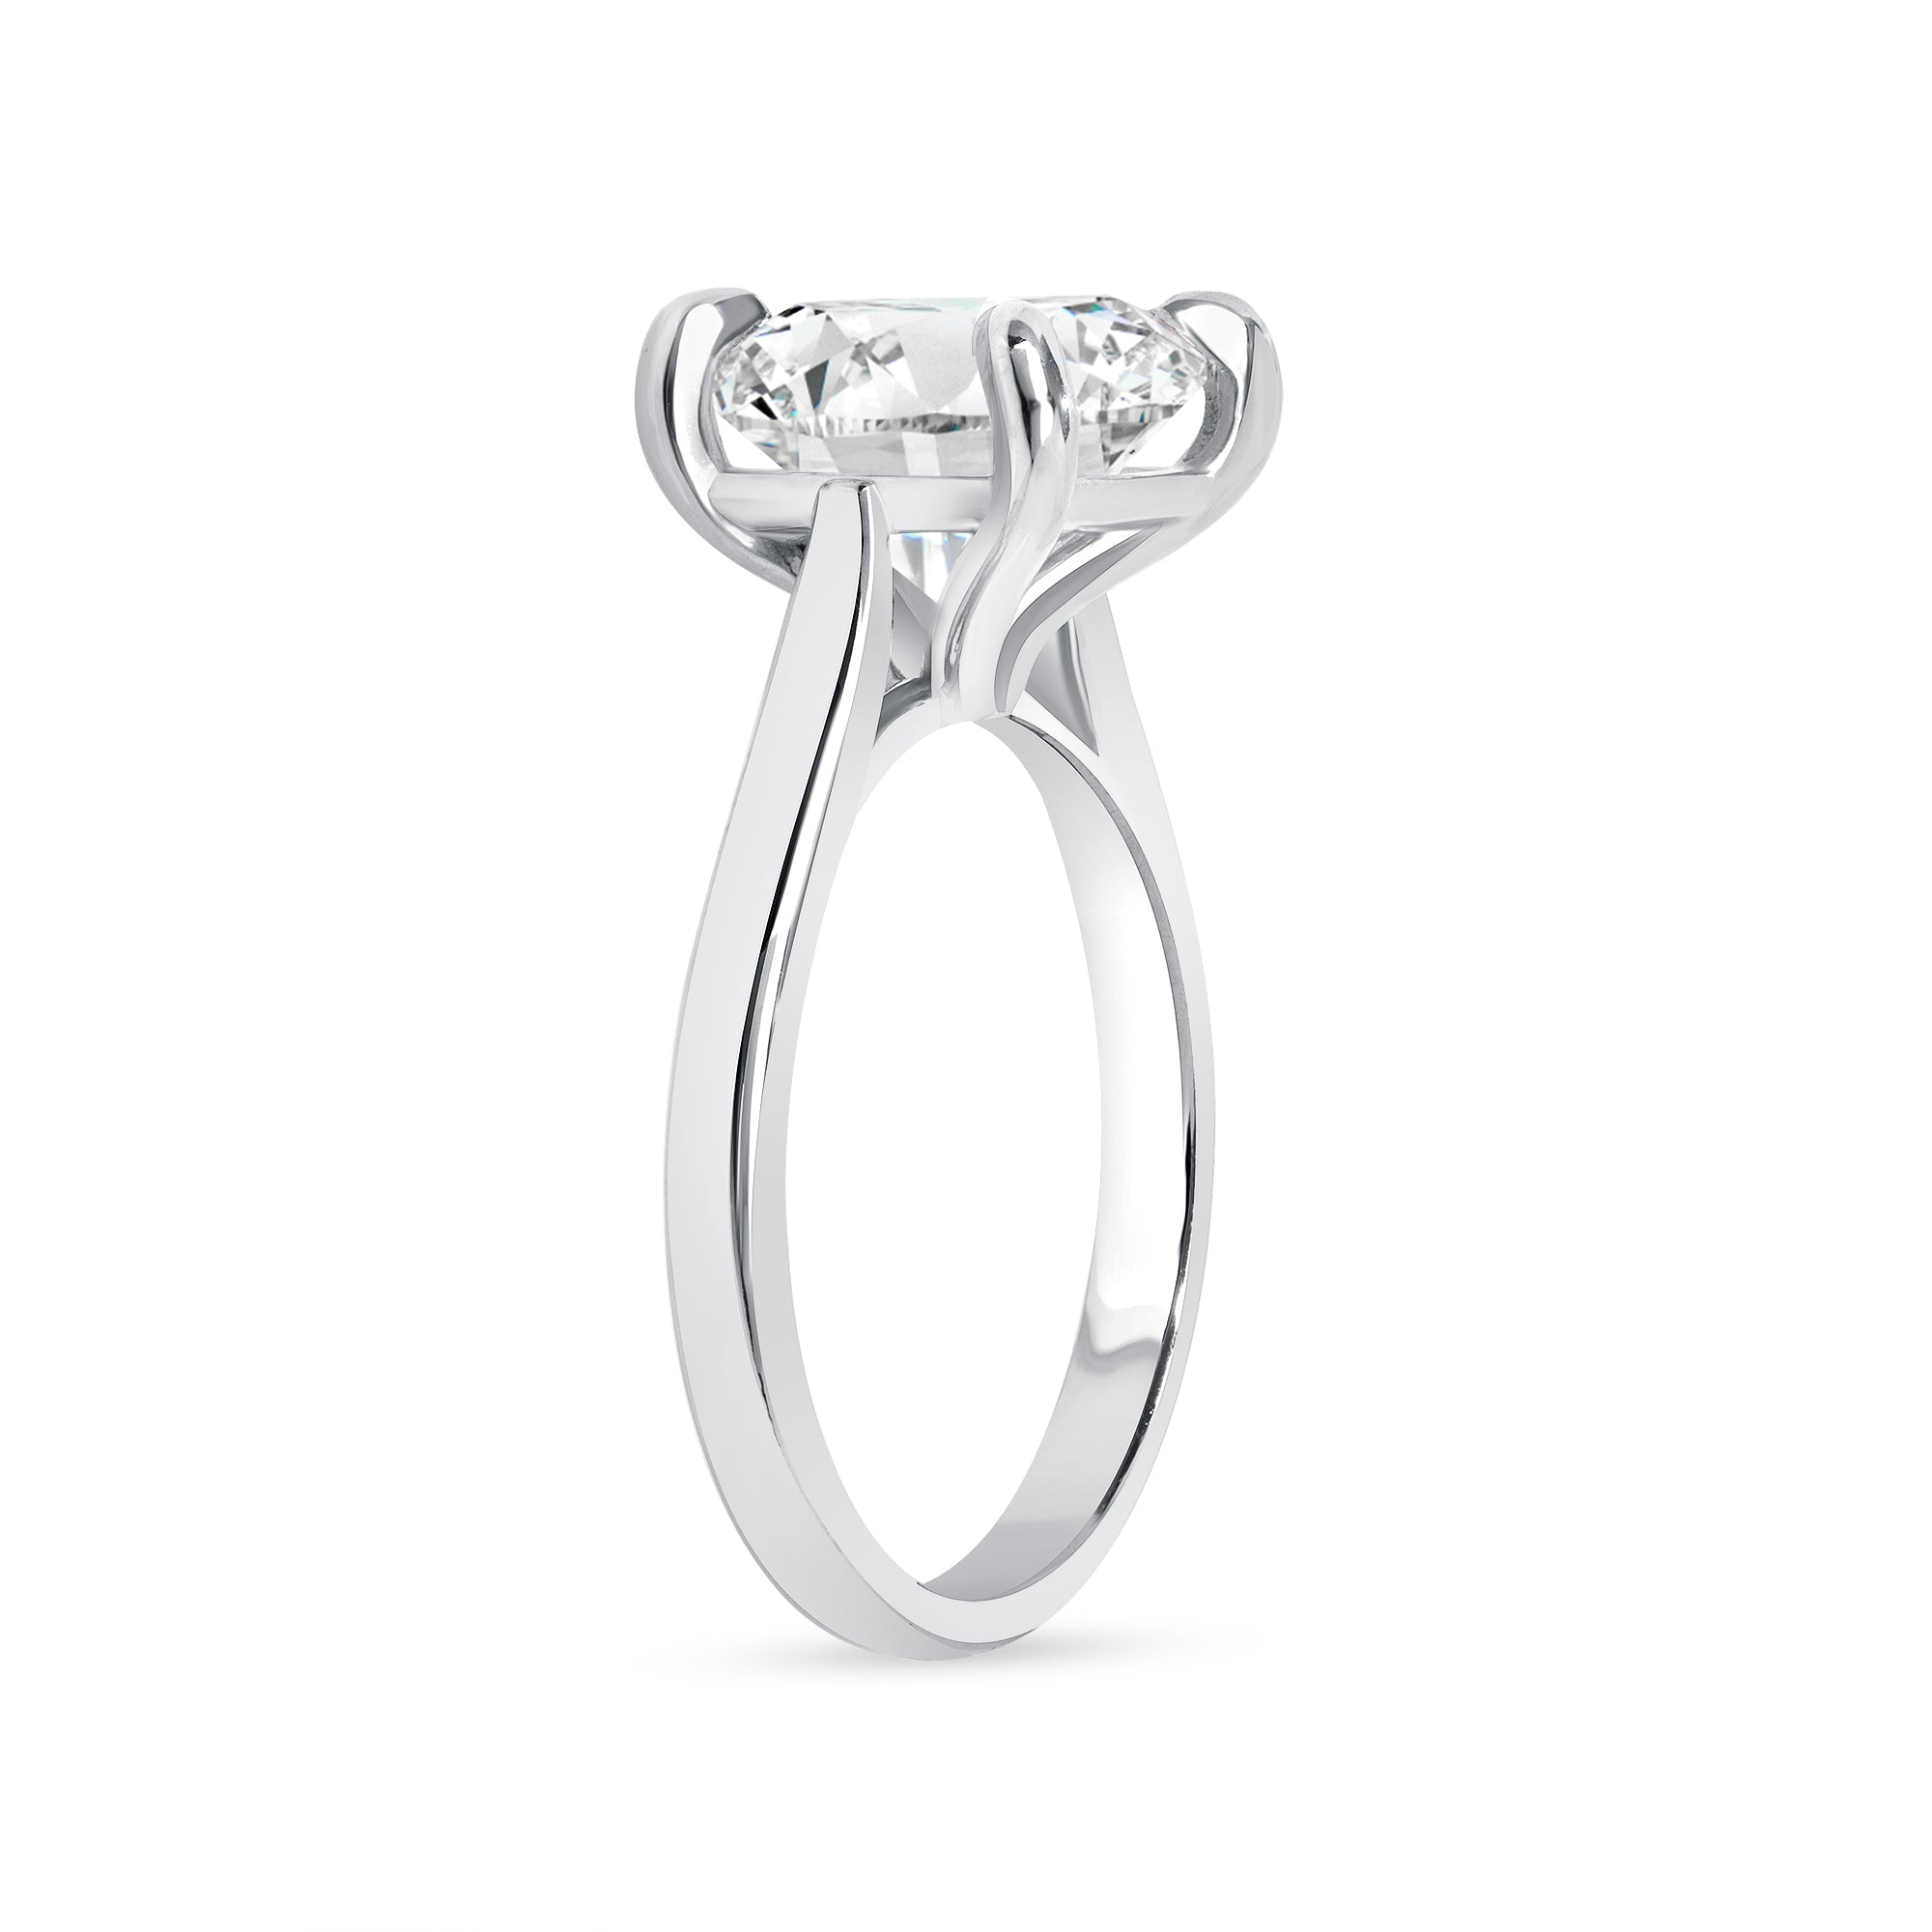 4.08ct Cushion Cut Diamond Solitaire Ring in 18k White Gold Band, GIA Certified